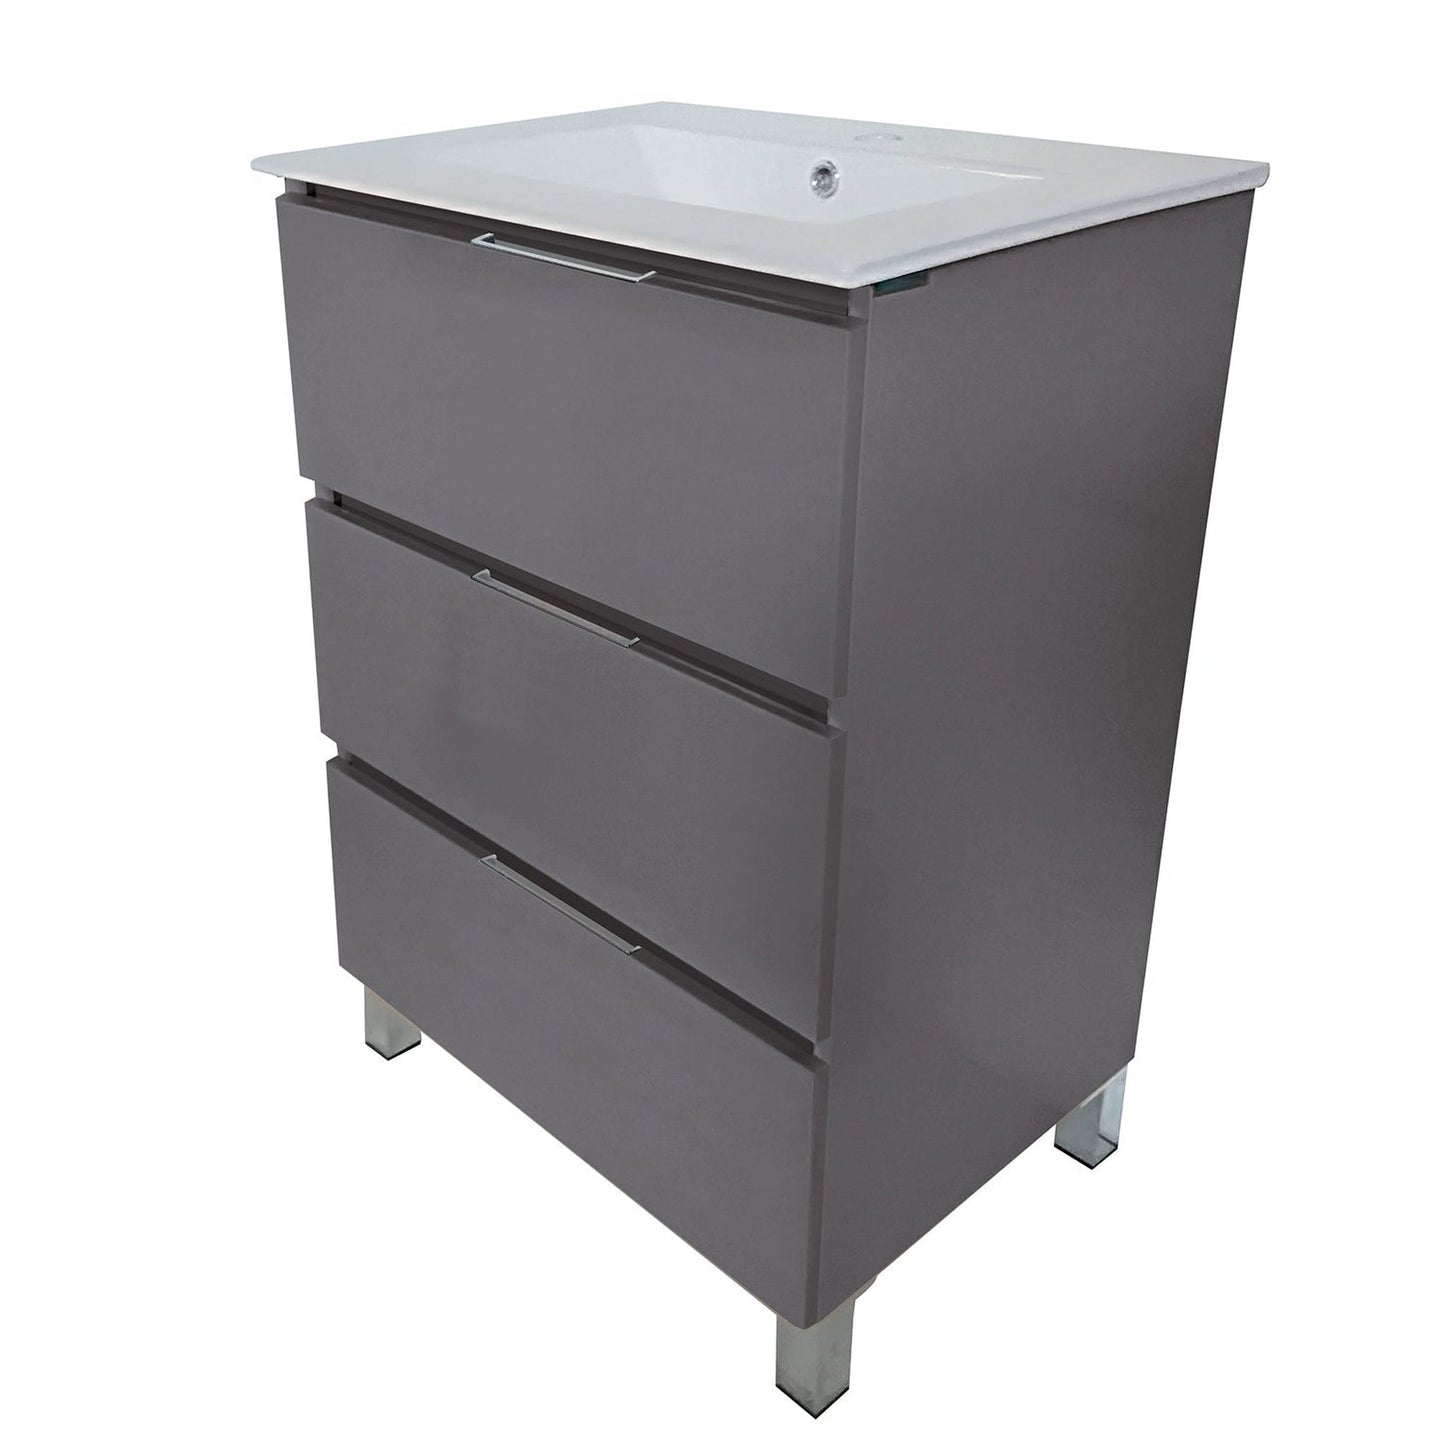 Eviva Malmo 28" x 34" Gray Freestanding Bathroom Vanity With White Porcelain Integrated Sink